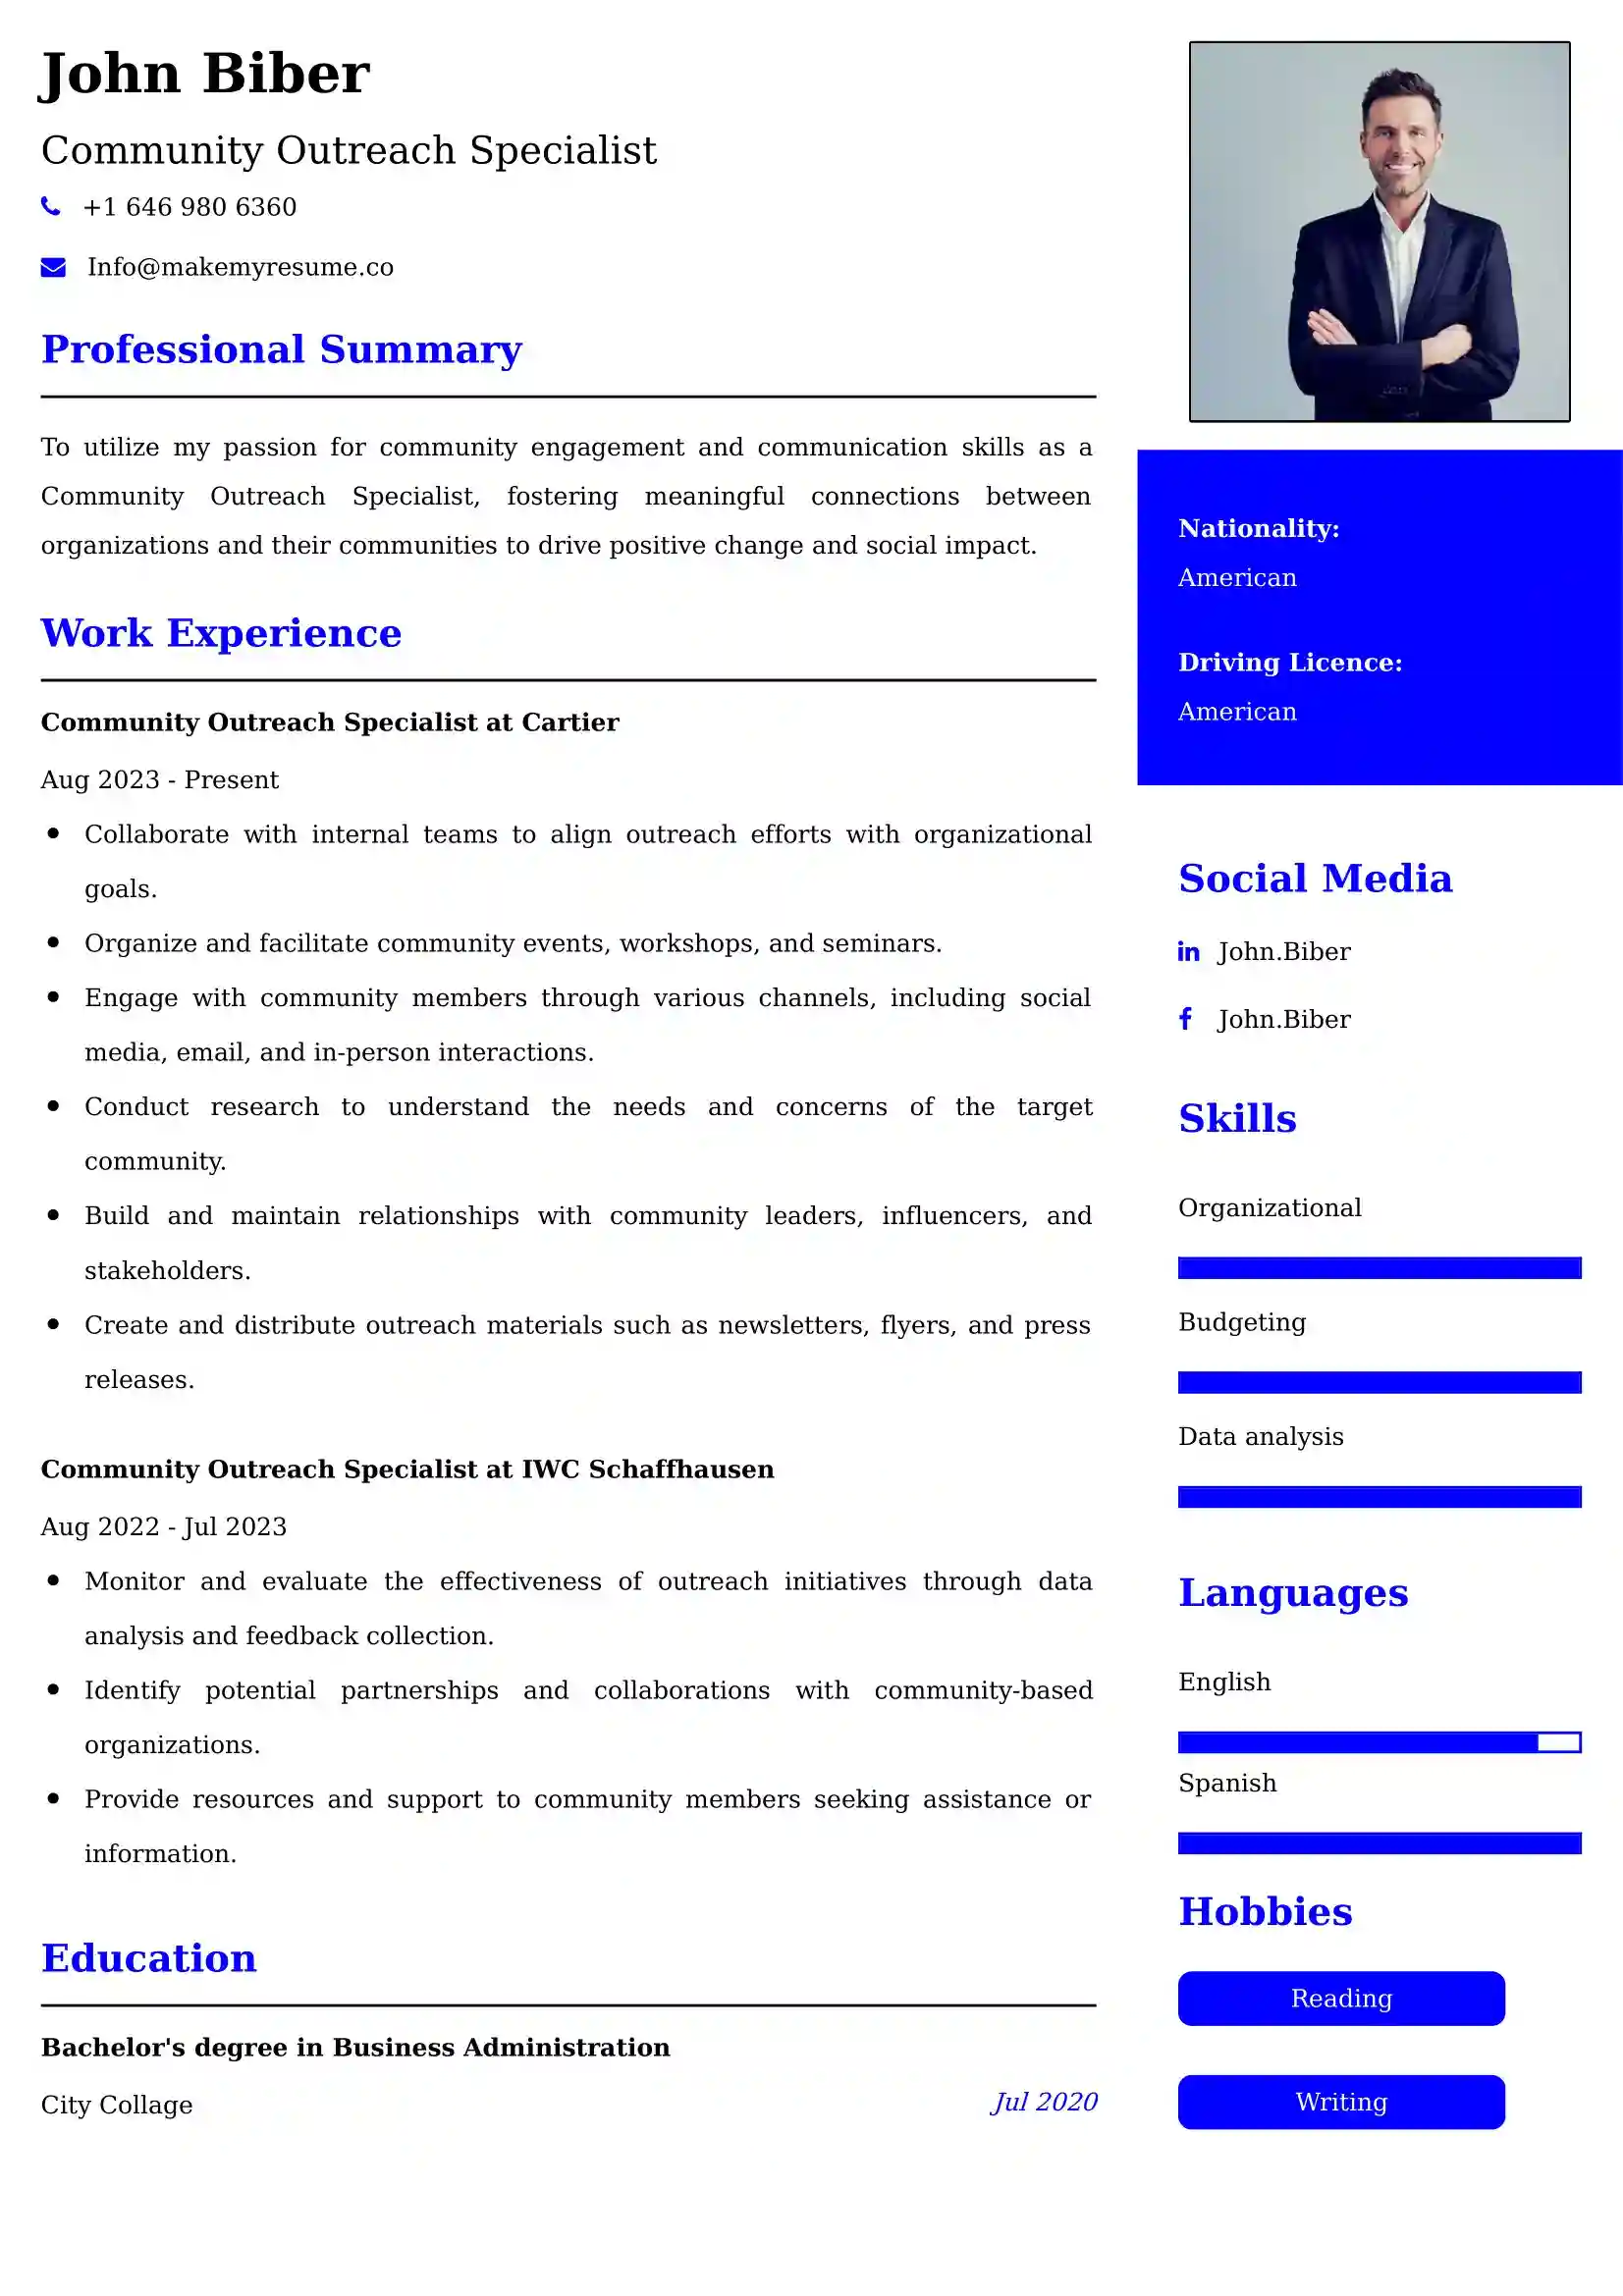 Community Outreach Specialist CV Examples - US Format